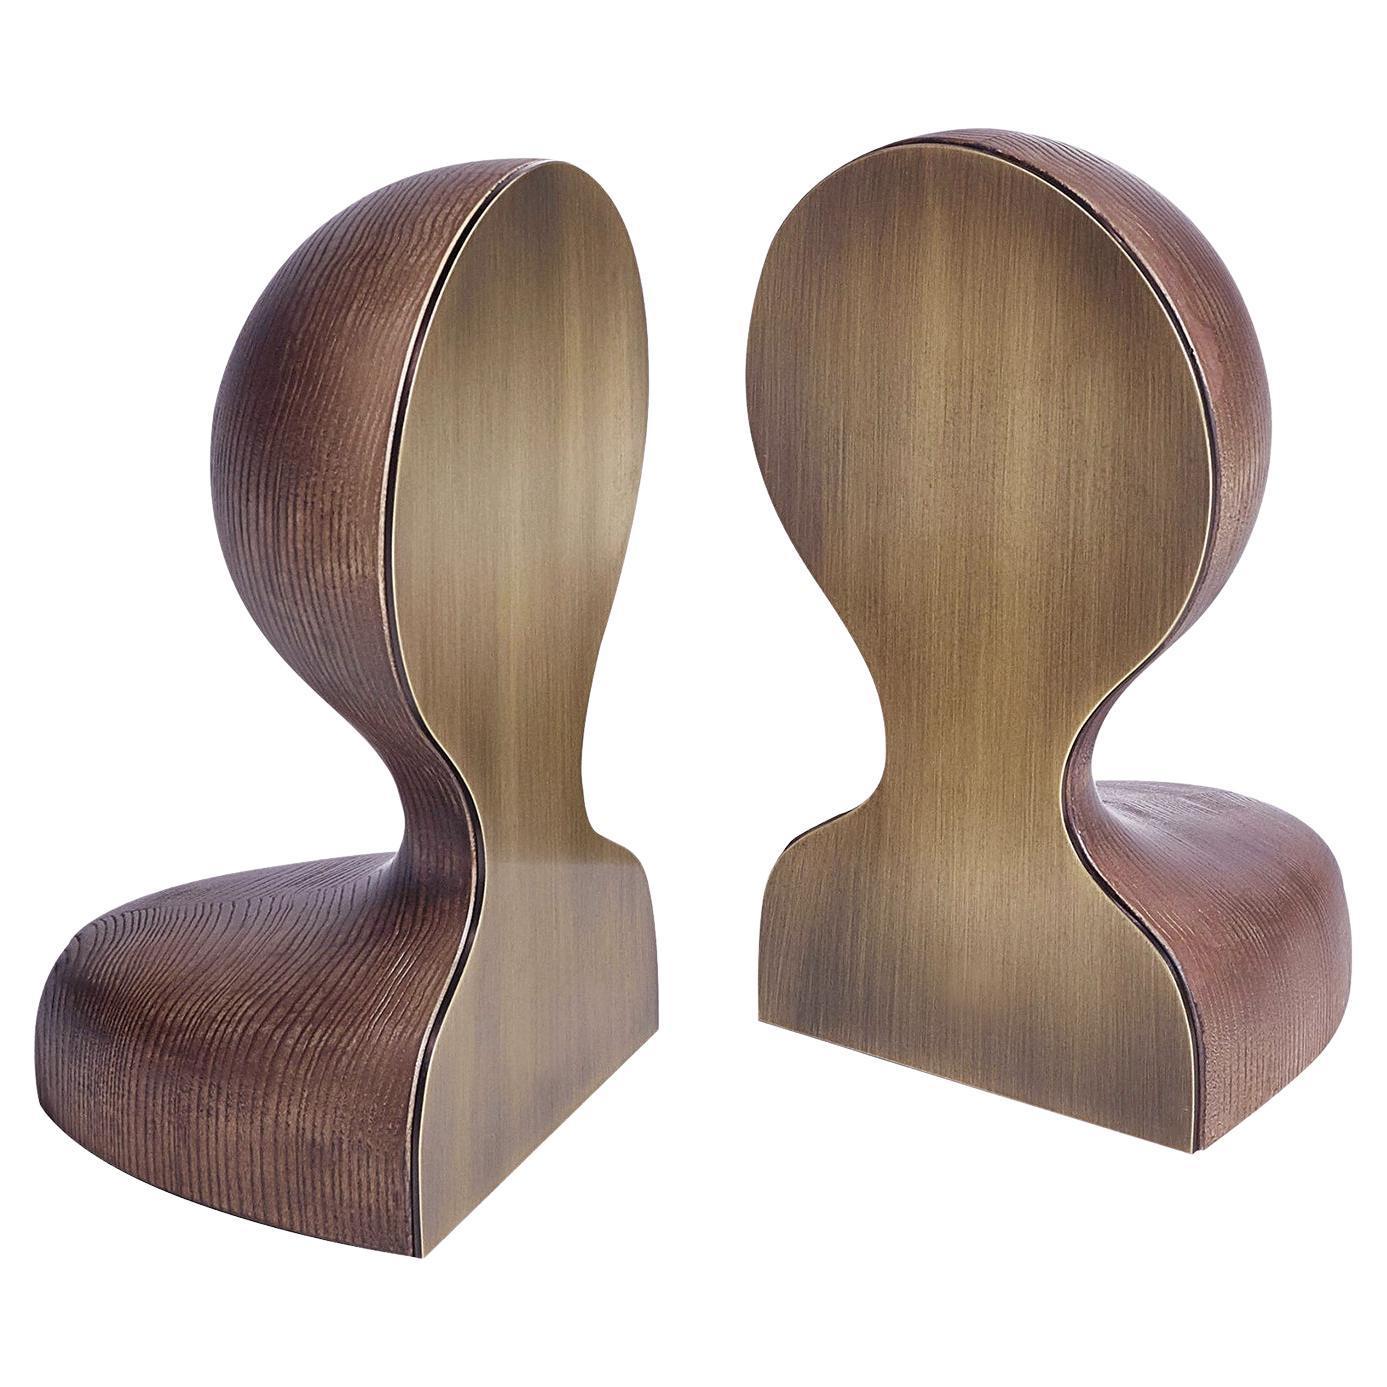 Body Parts Set of 2 Bookends